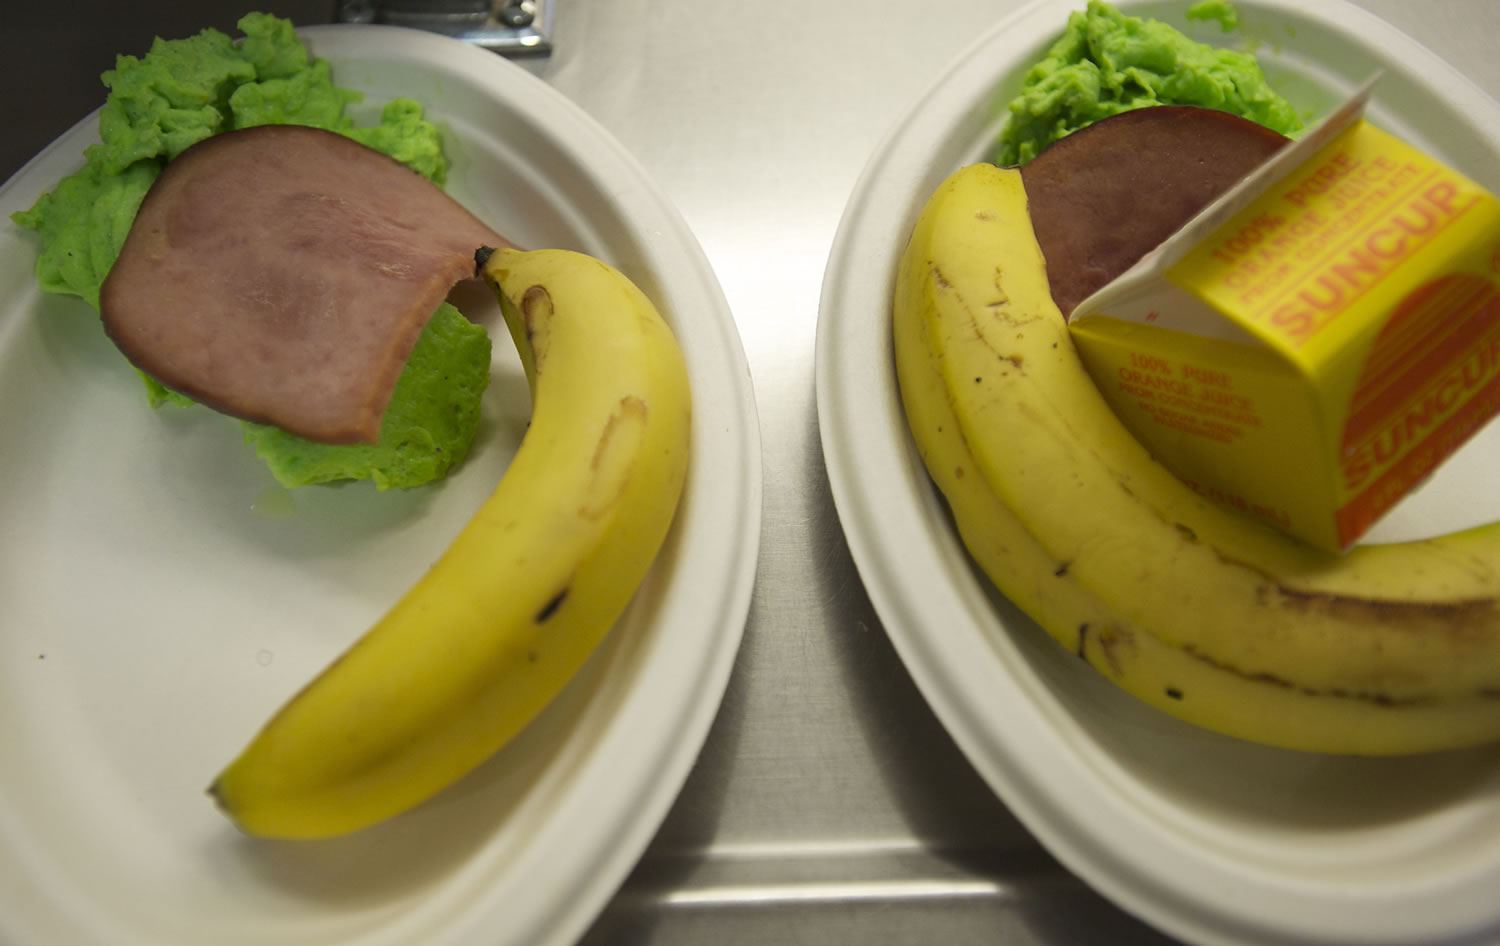 Green eggs and ham were served to 7,000 first-graders this week as part of &quot;Read Across America Week.&quot;